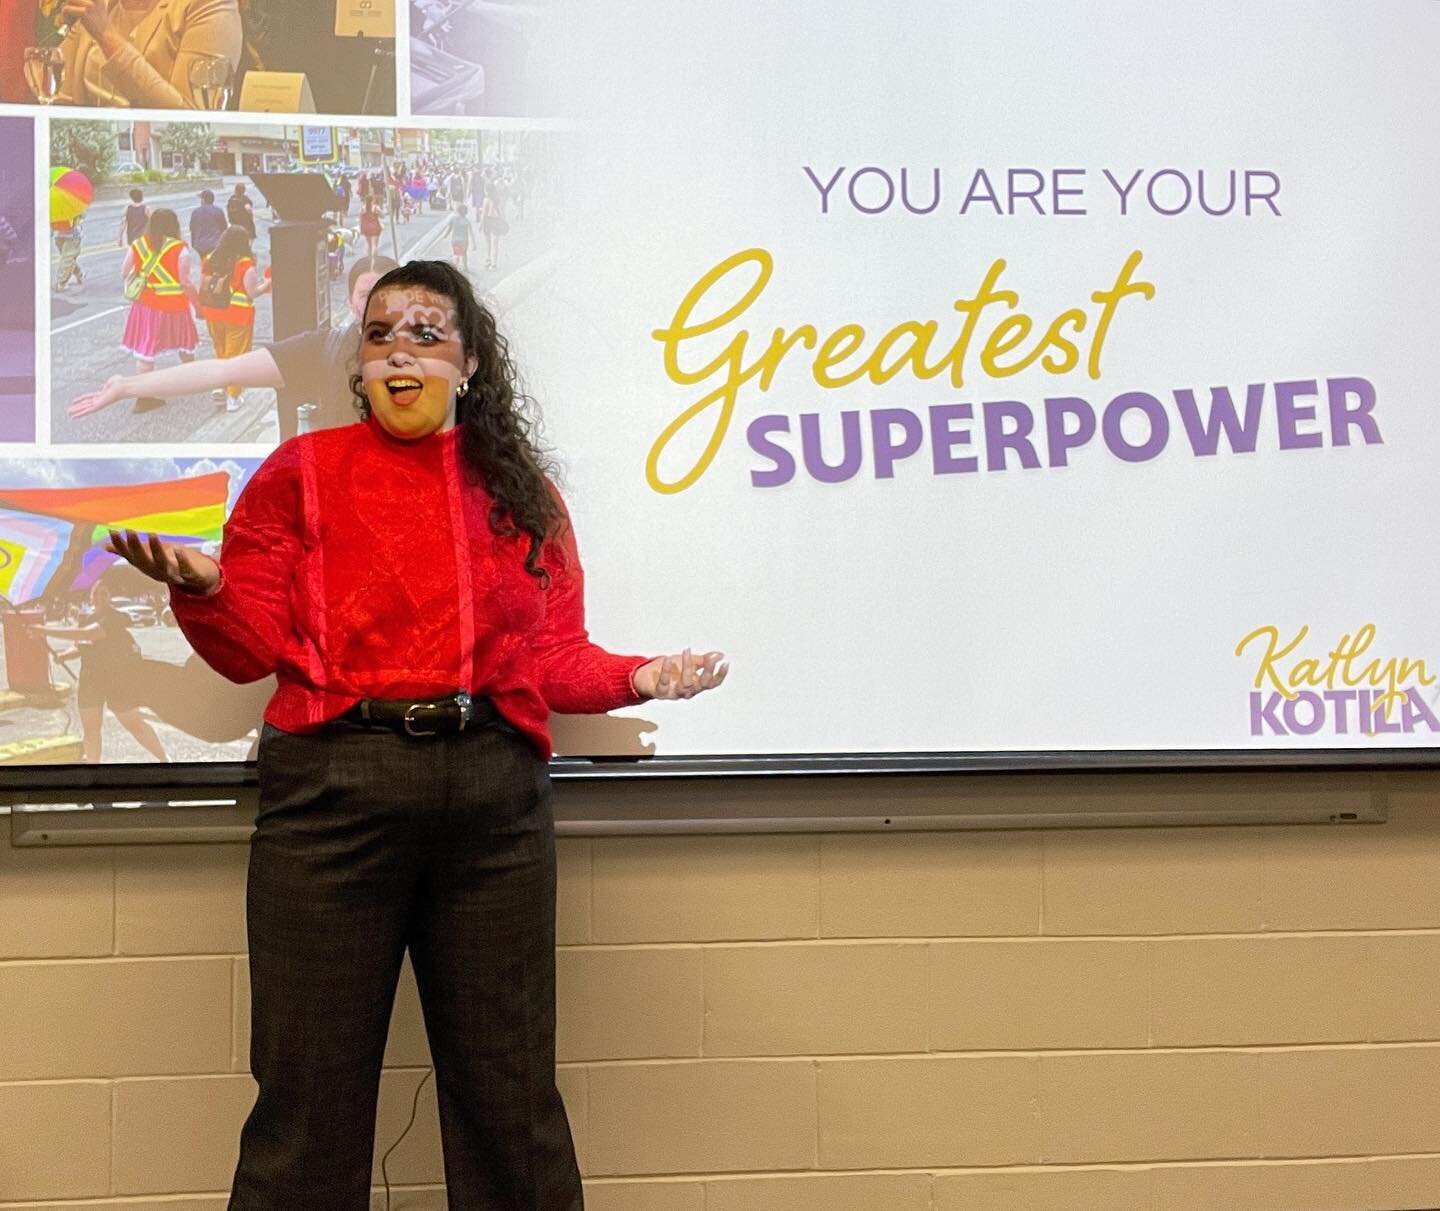 You are your greatest superpower💥

I had a great time yesterday presenting at the RDSB Student Senate Leadership Through Action Conference at Cambrian College.

I had the pleasure of speaking with two separate groups of students about harnessing the